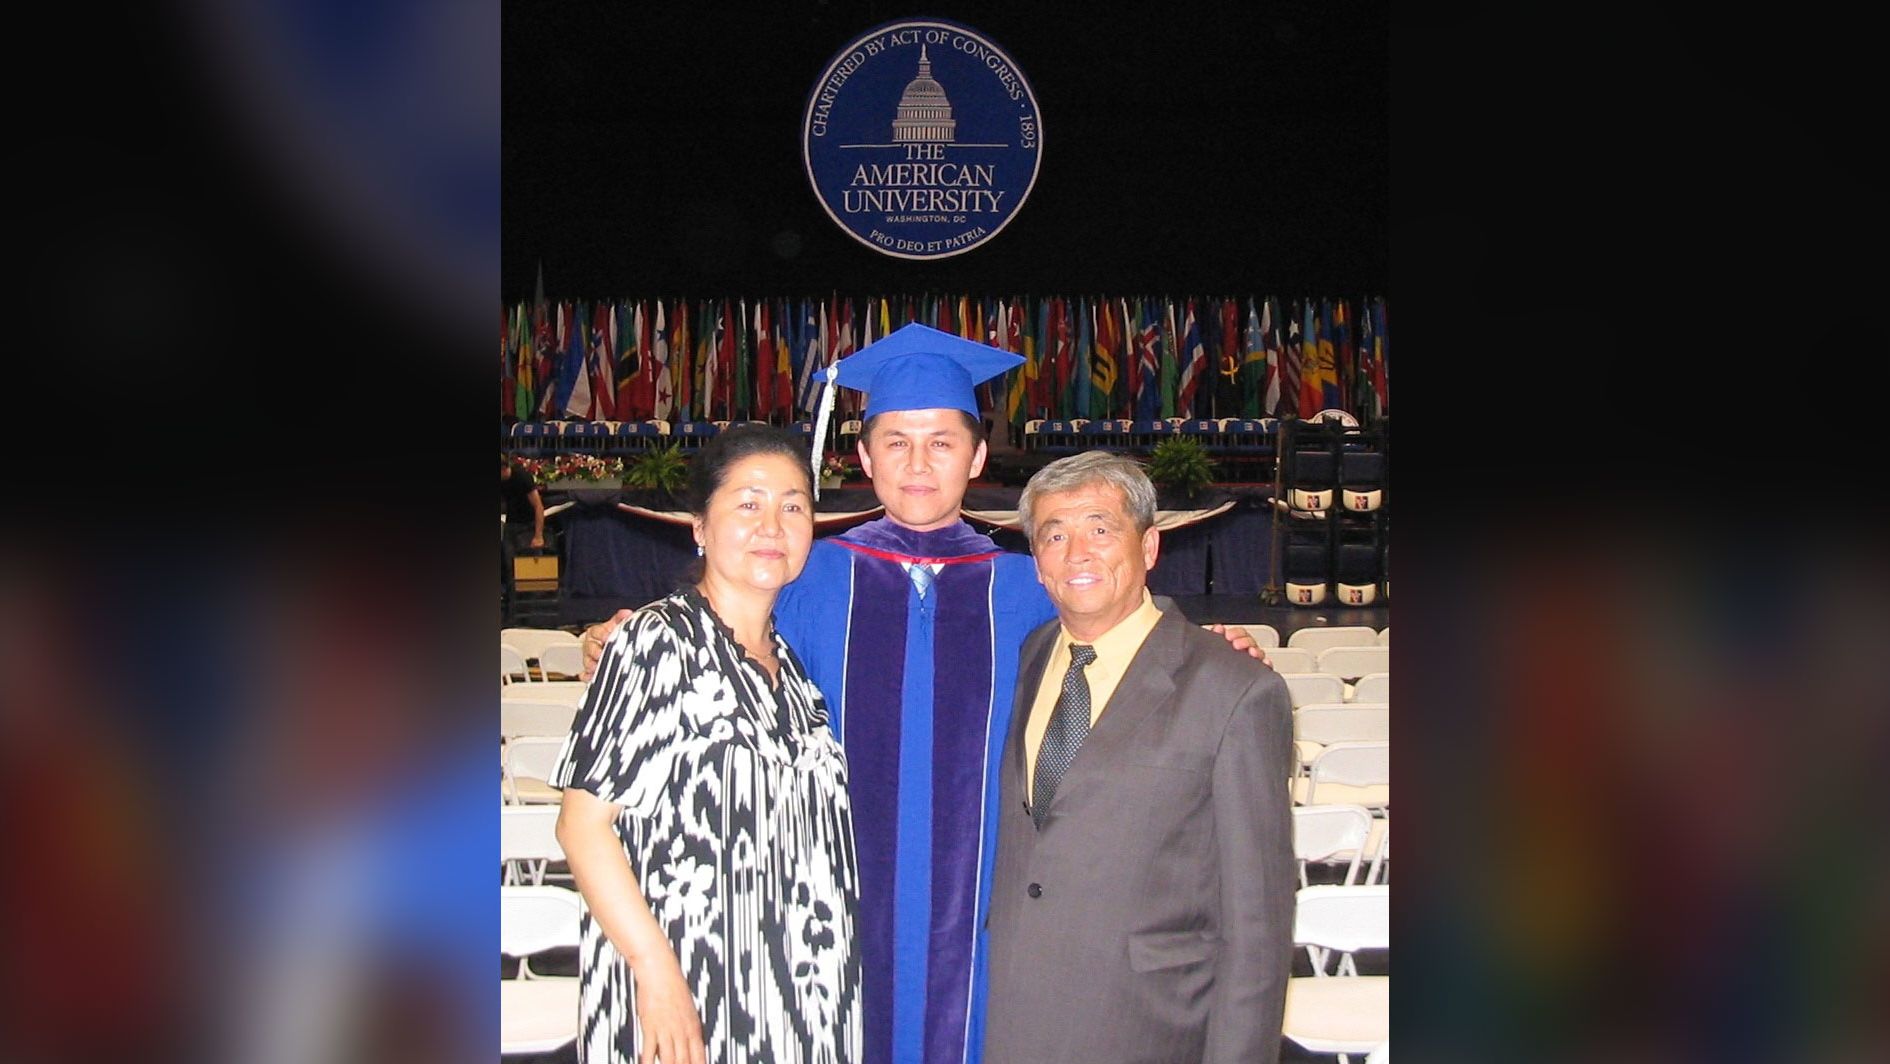 Nury Turkel's parents stand with him at his law school commencement in May 2004.